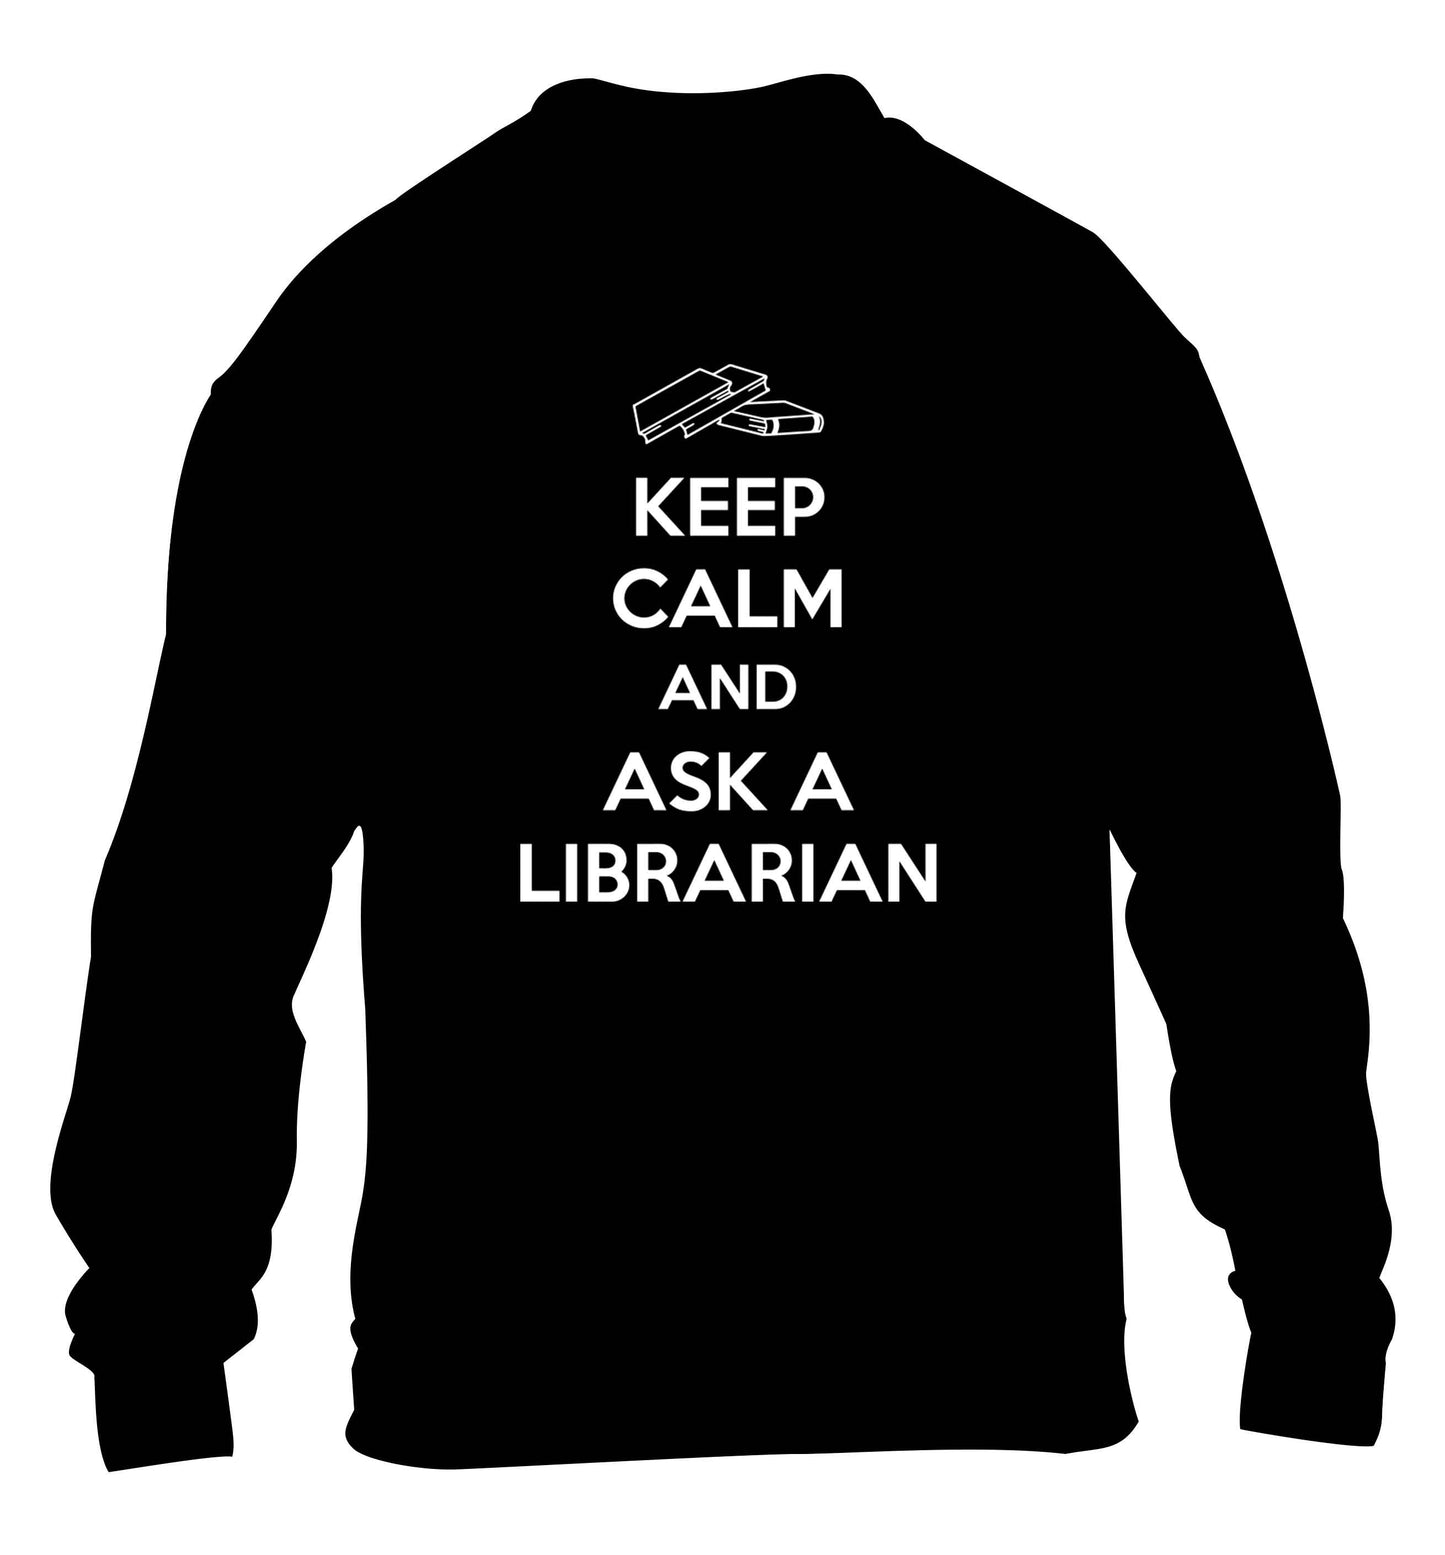 Keep calm and ask a librarian children's black sweater 12-13 Years